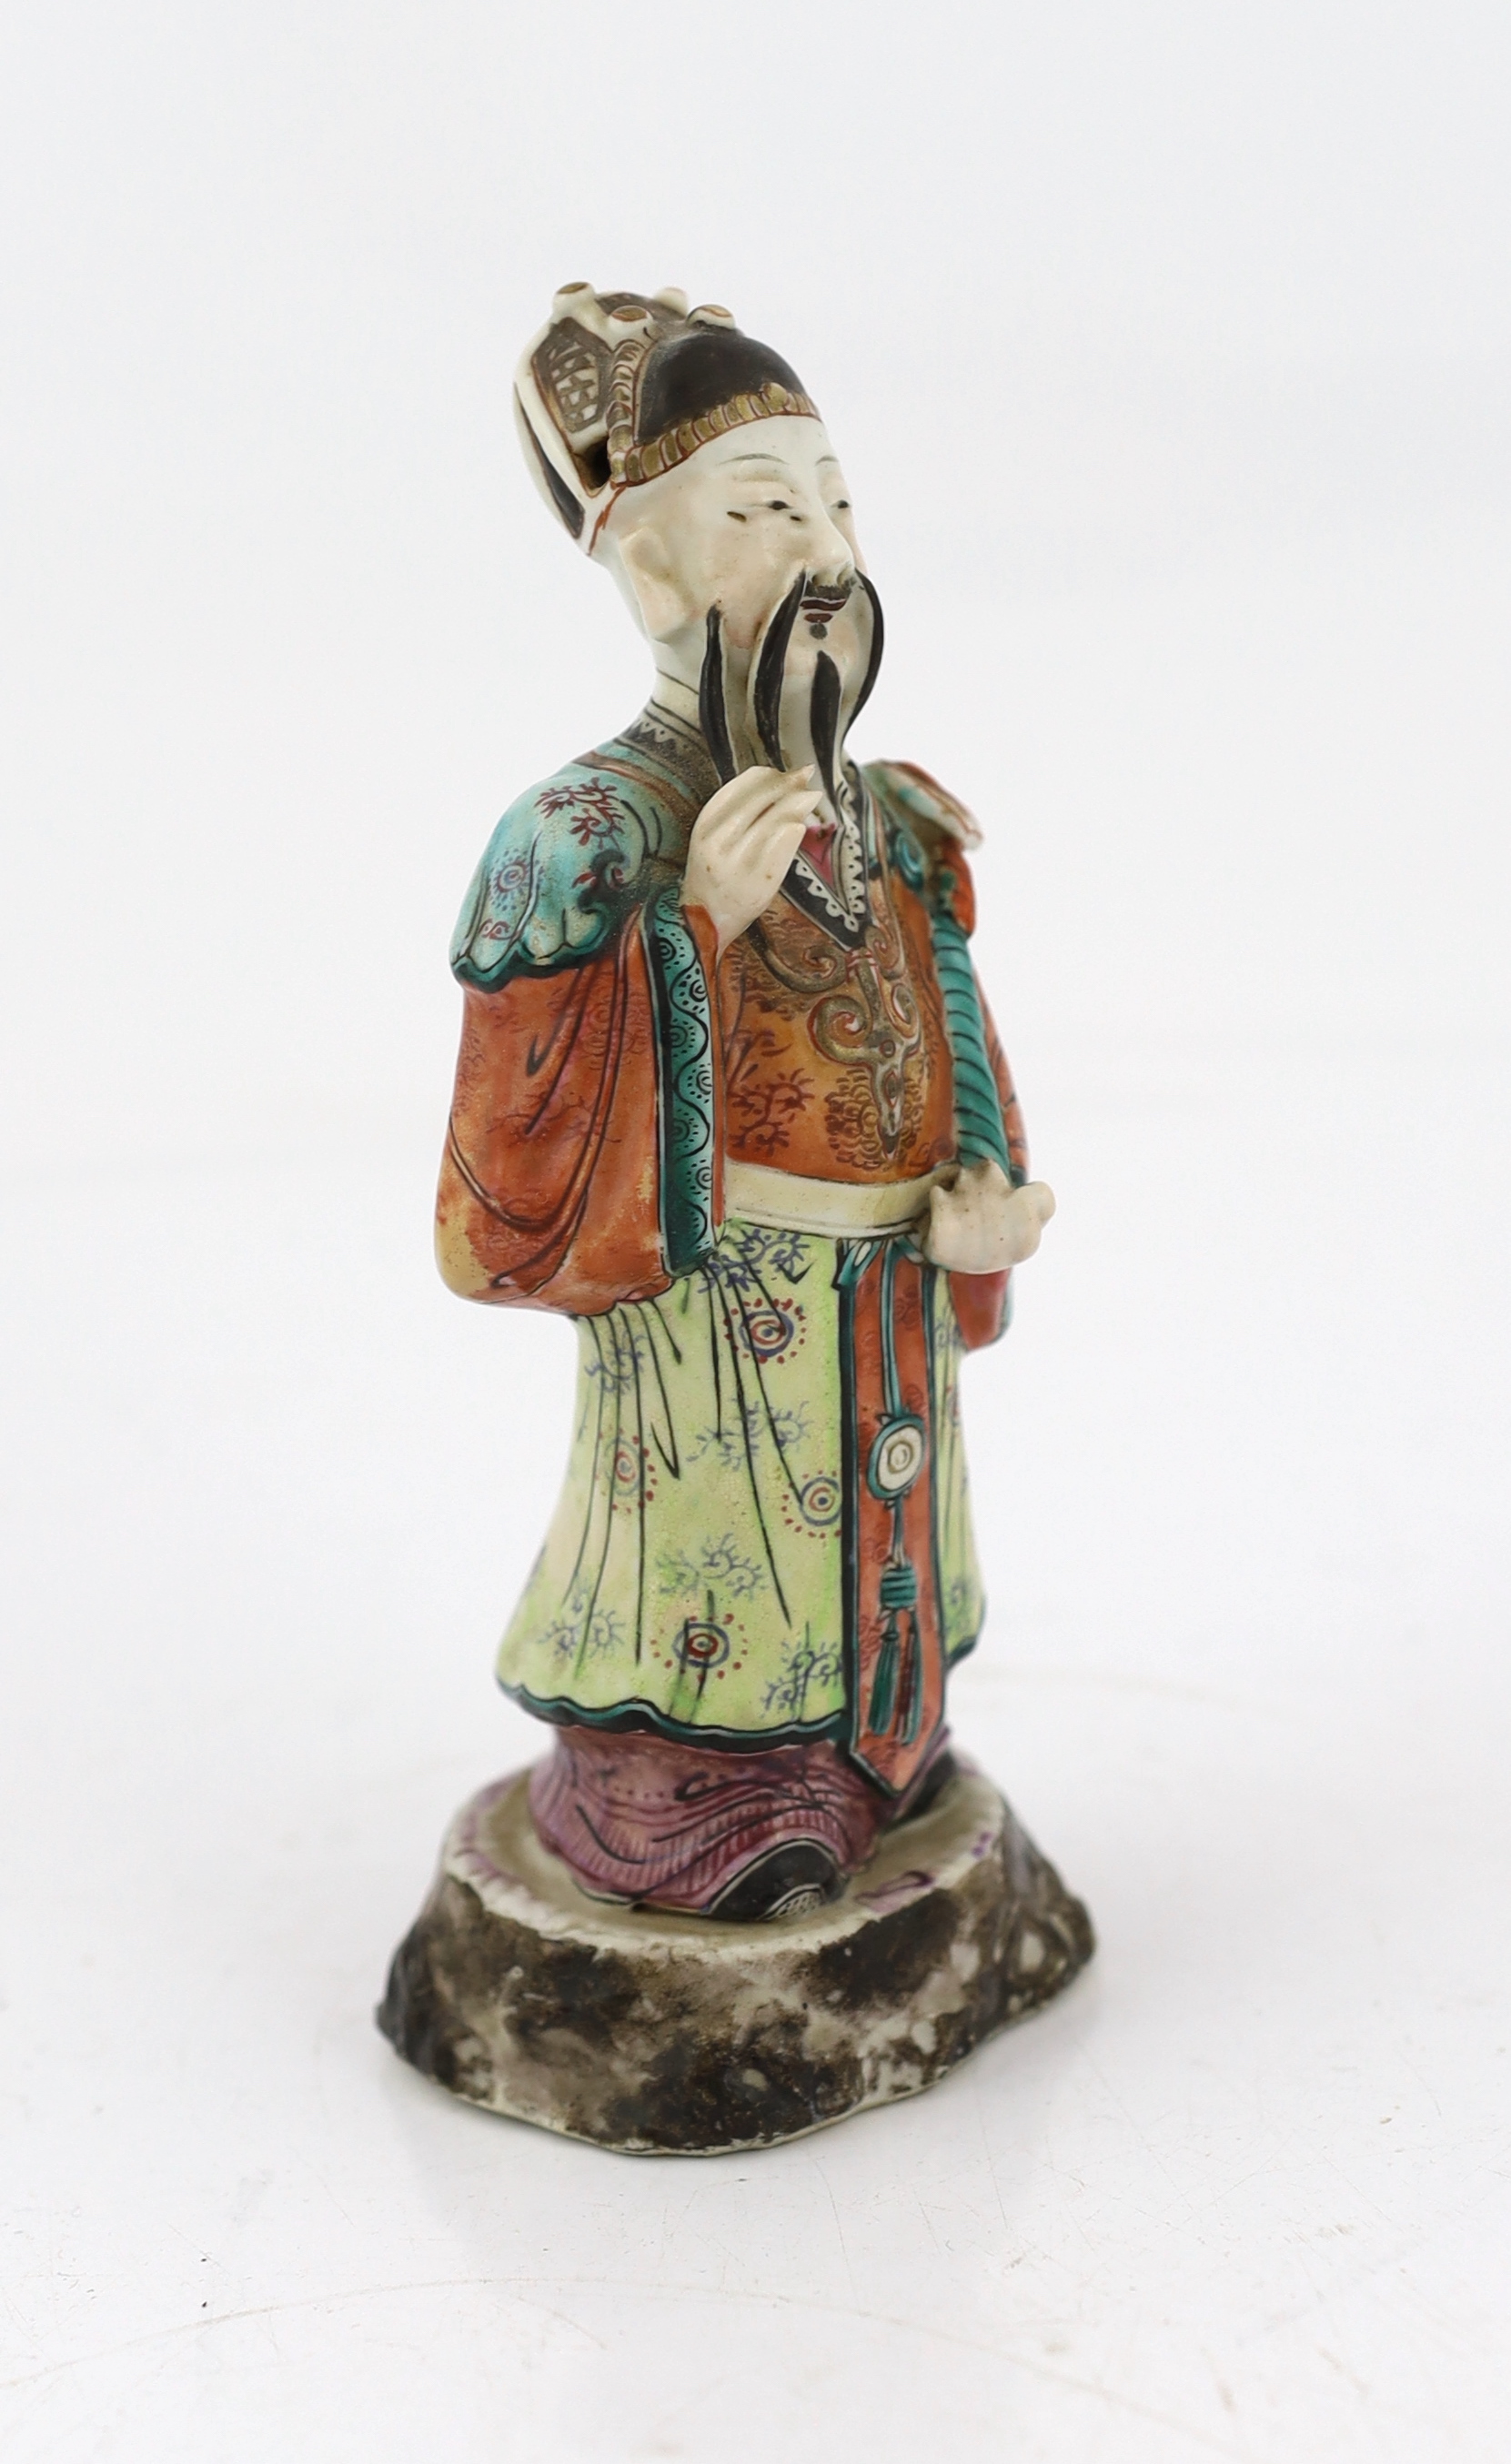 A Chinese enamelled porcelain figure of a court official, Jiaqing period (1796-1820), loss to right index finger